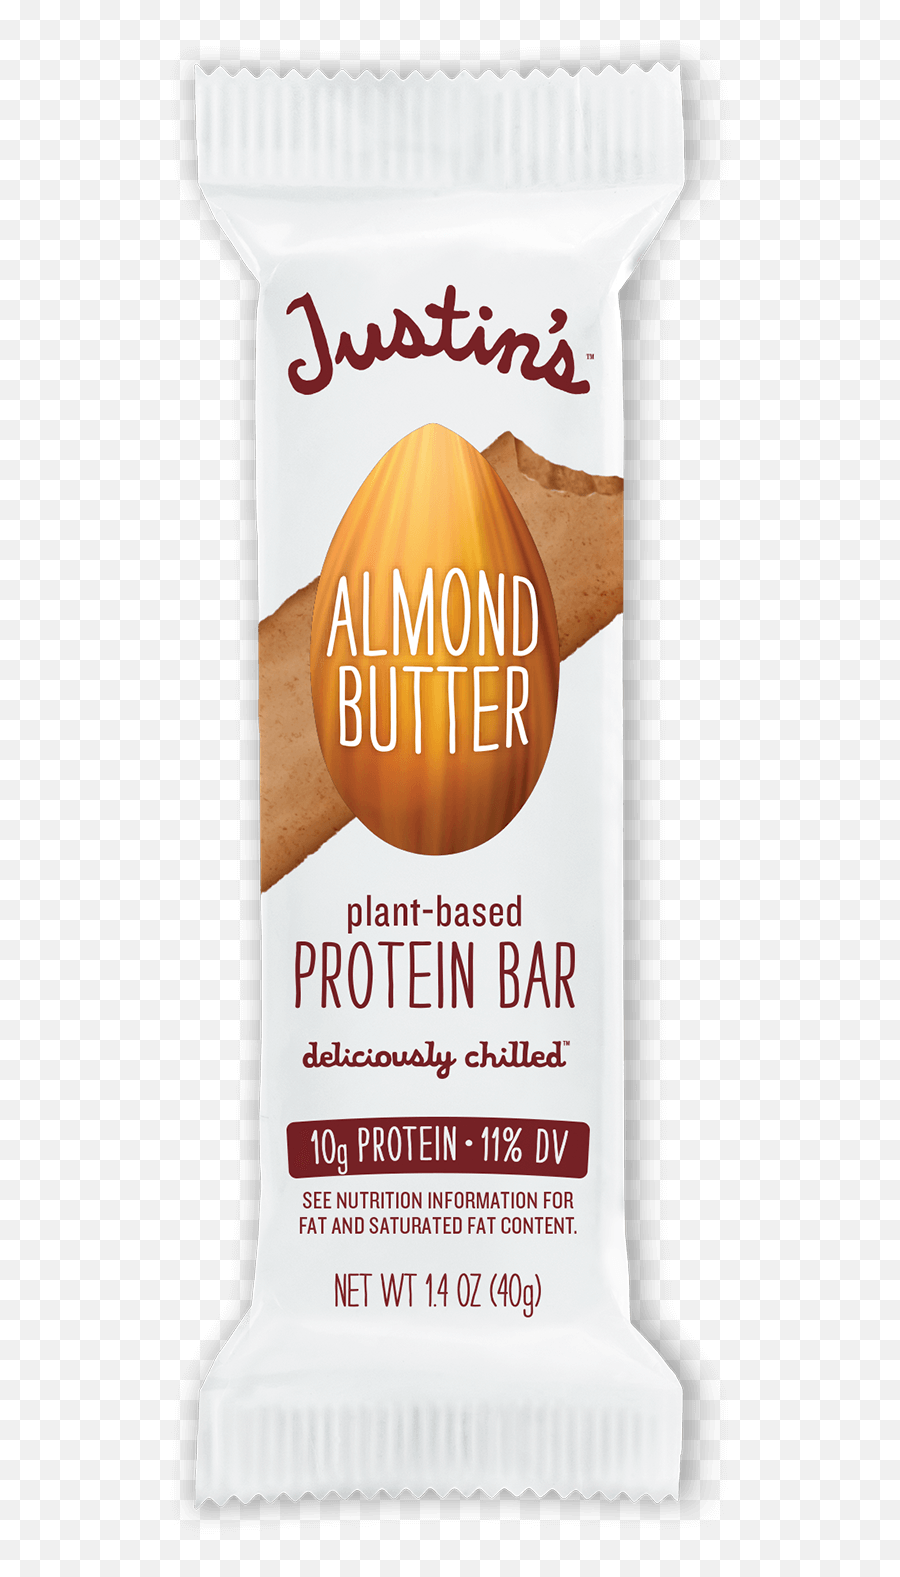 Almond Butter Protein Bar Justinu0027s Products Emoji,Heart Emoticon Peanut Butter Bar